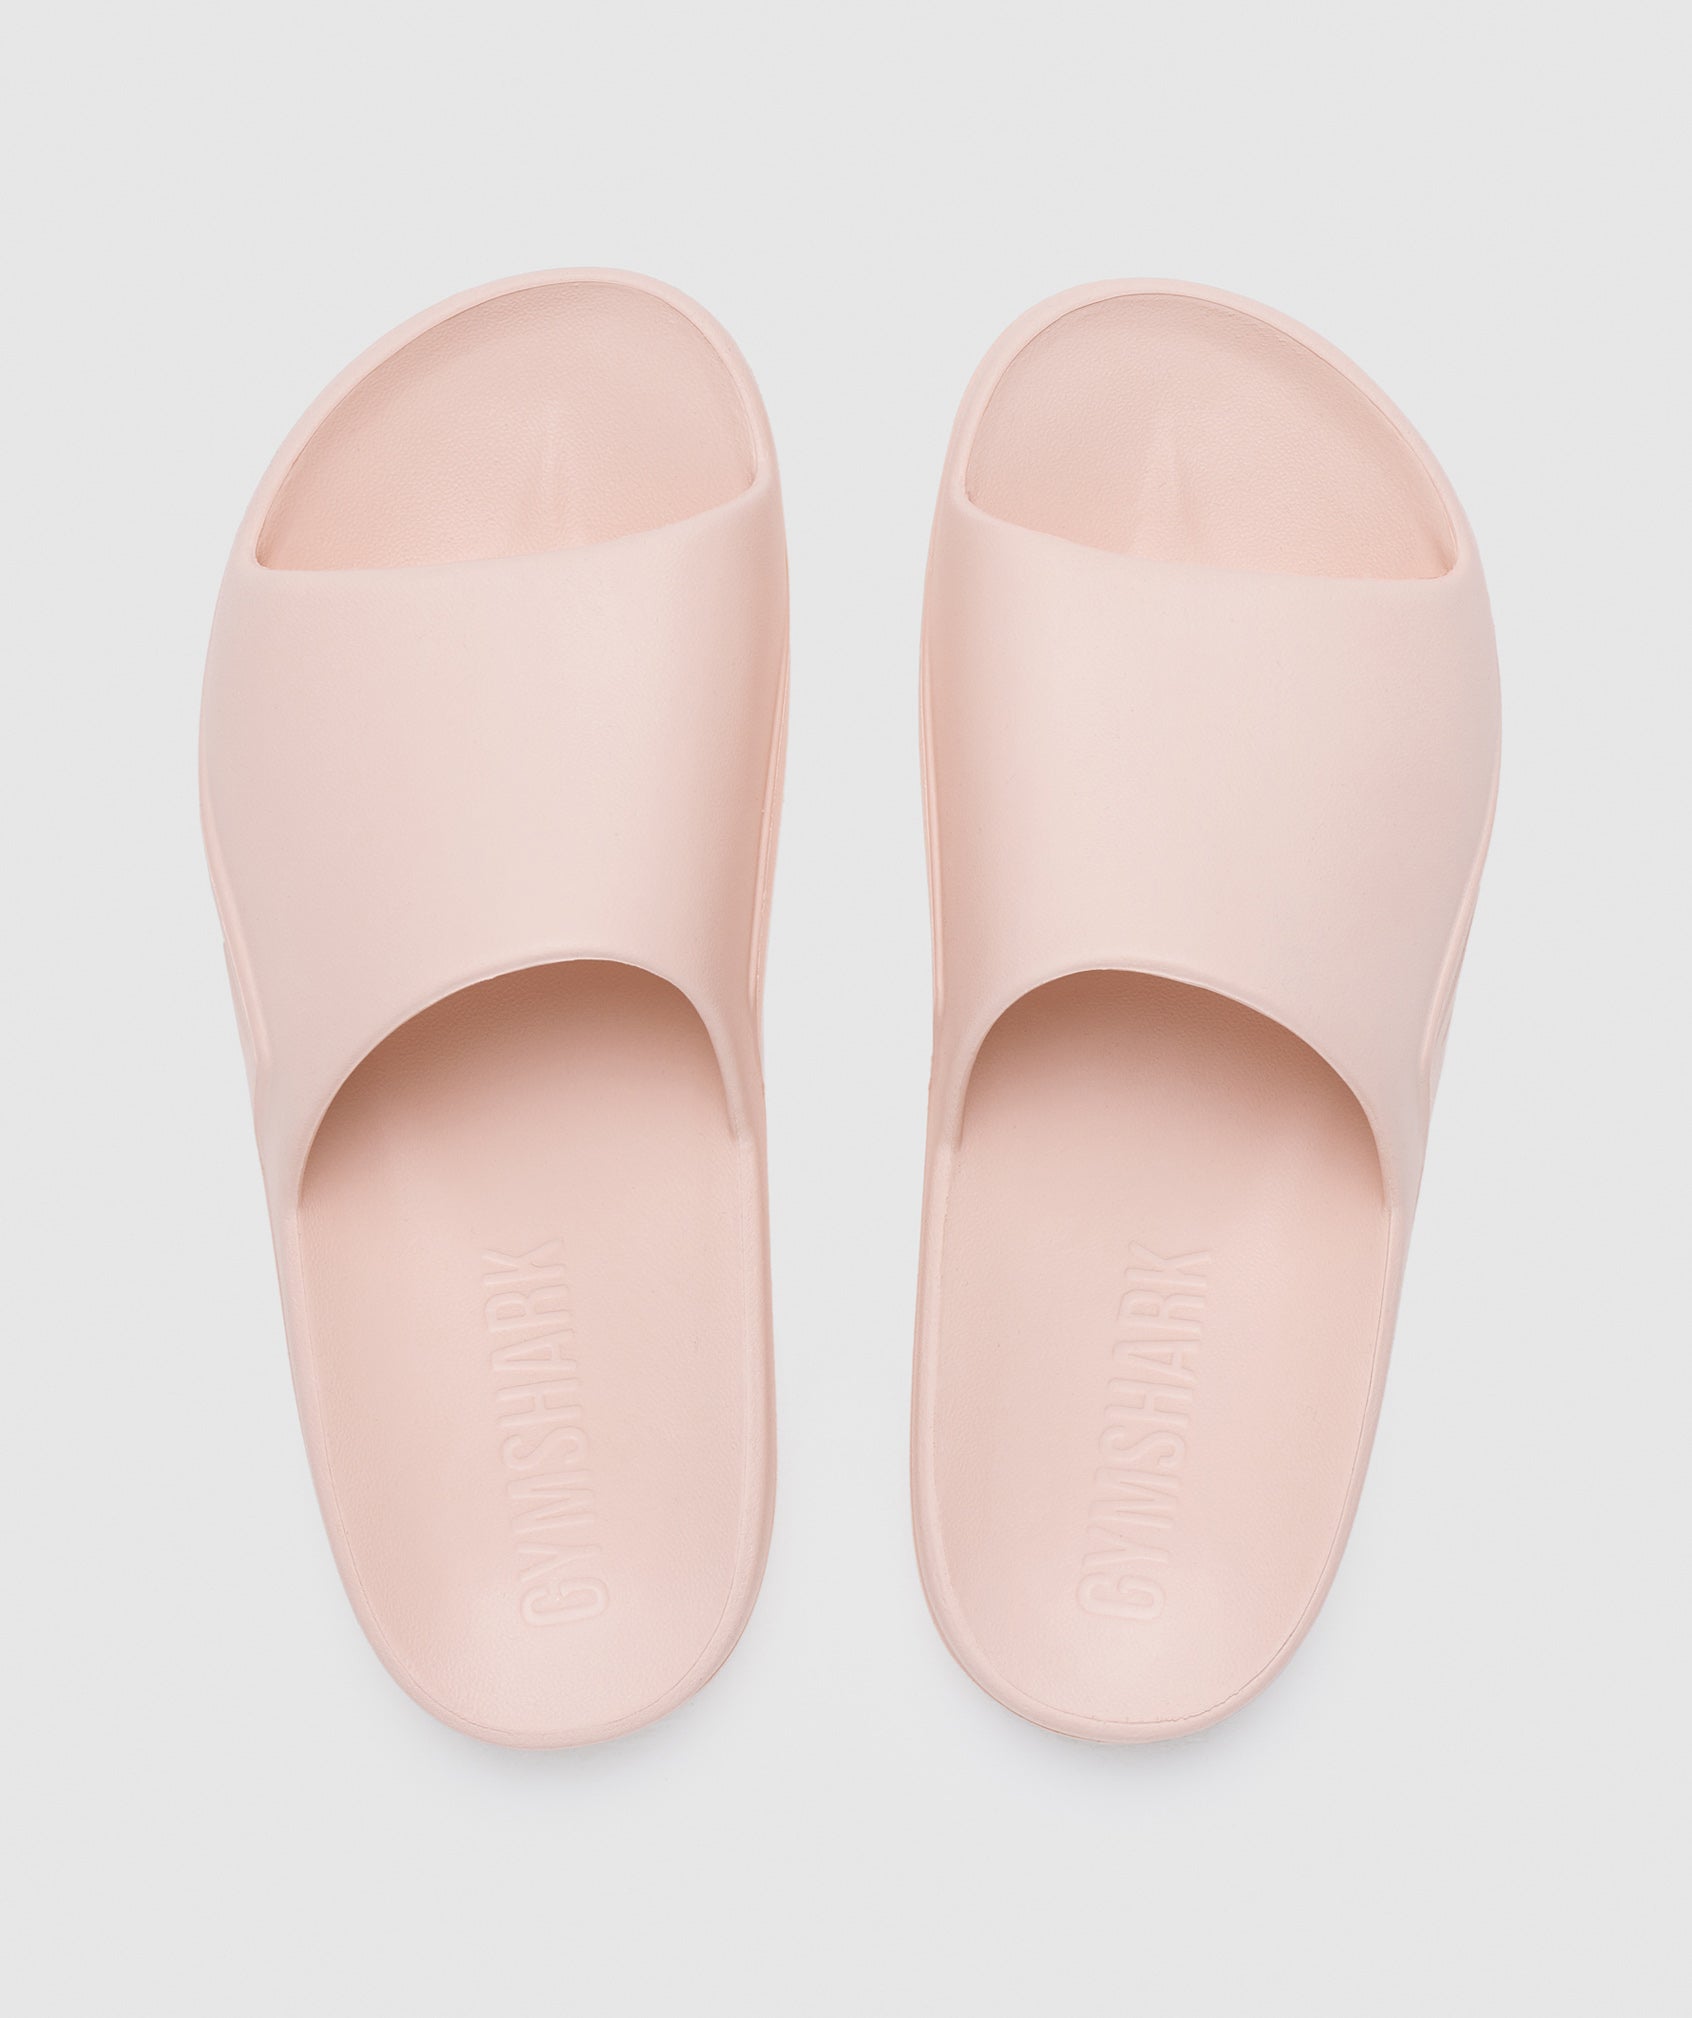 Rest Day Slides in Misty Pink is out of stock